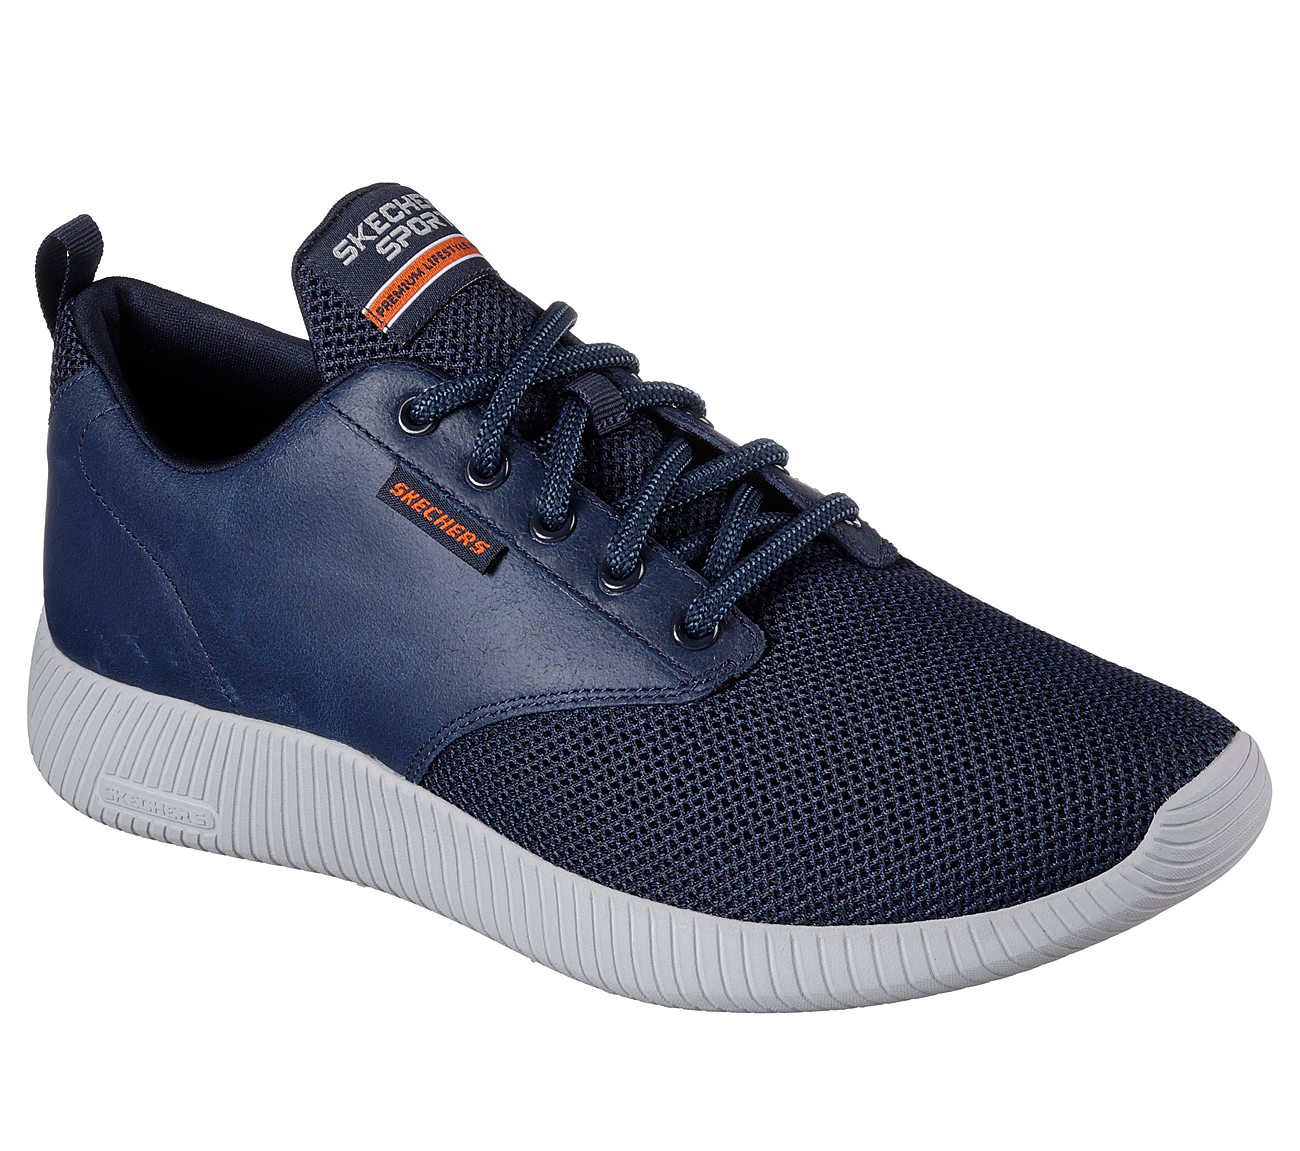 SKECHERS Depth Charge - Trahan Sport Shoes